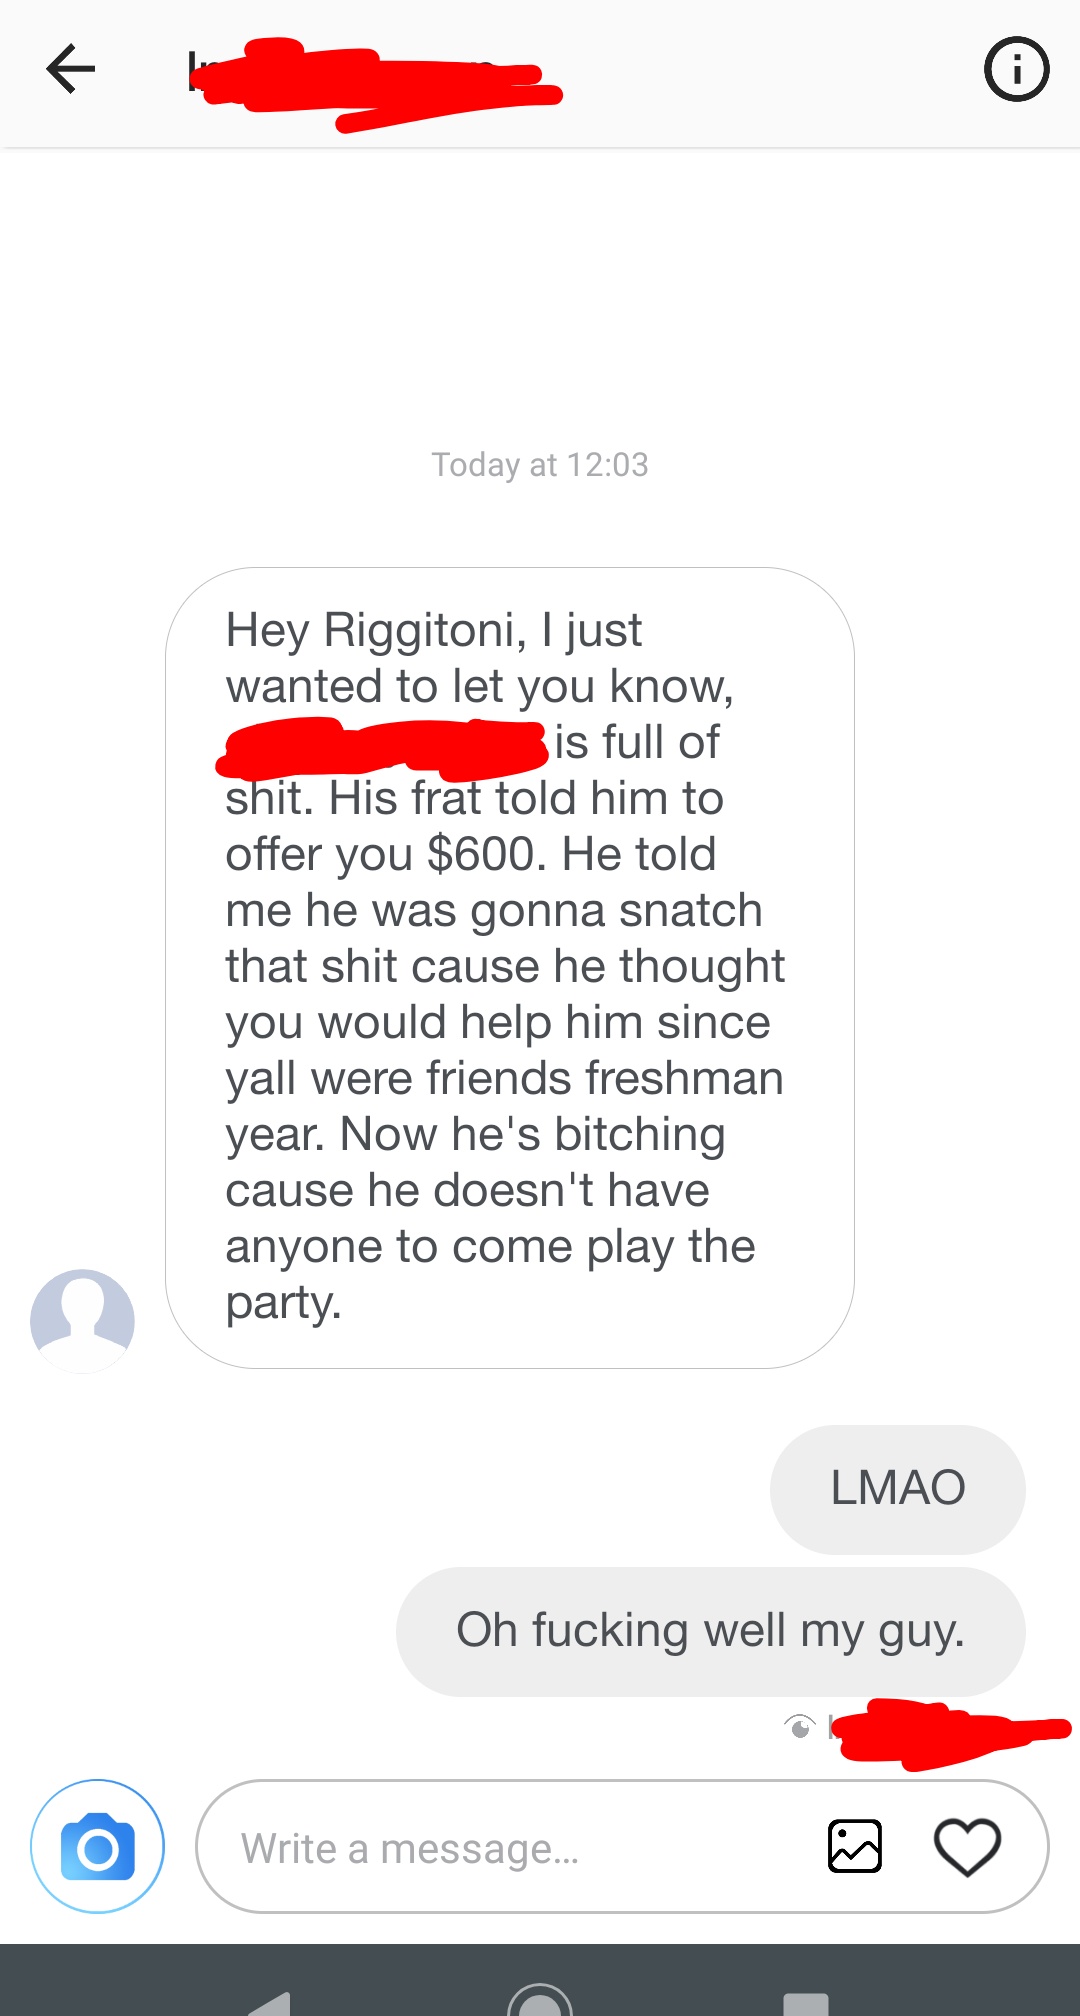 After making the text exchange, Riggitoni received this info from a person close to the frat.